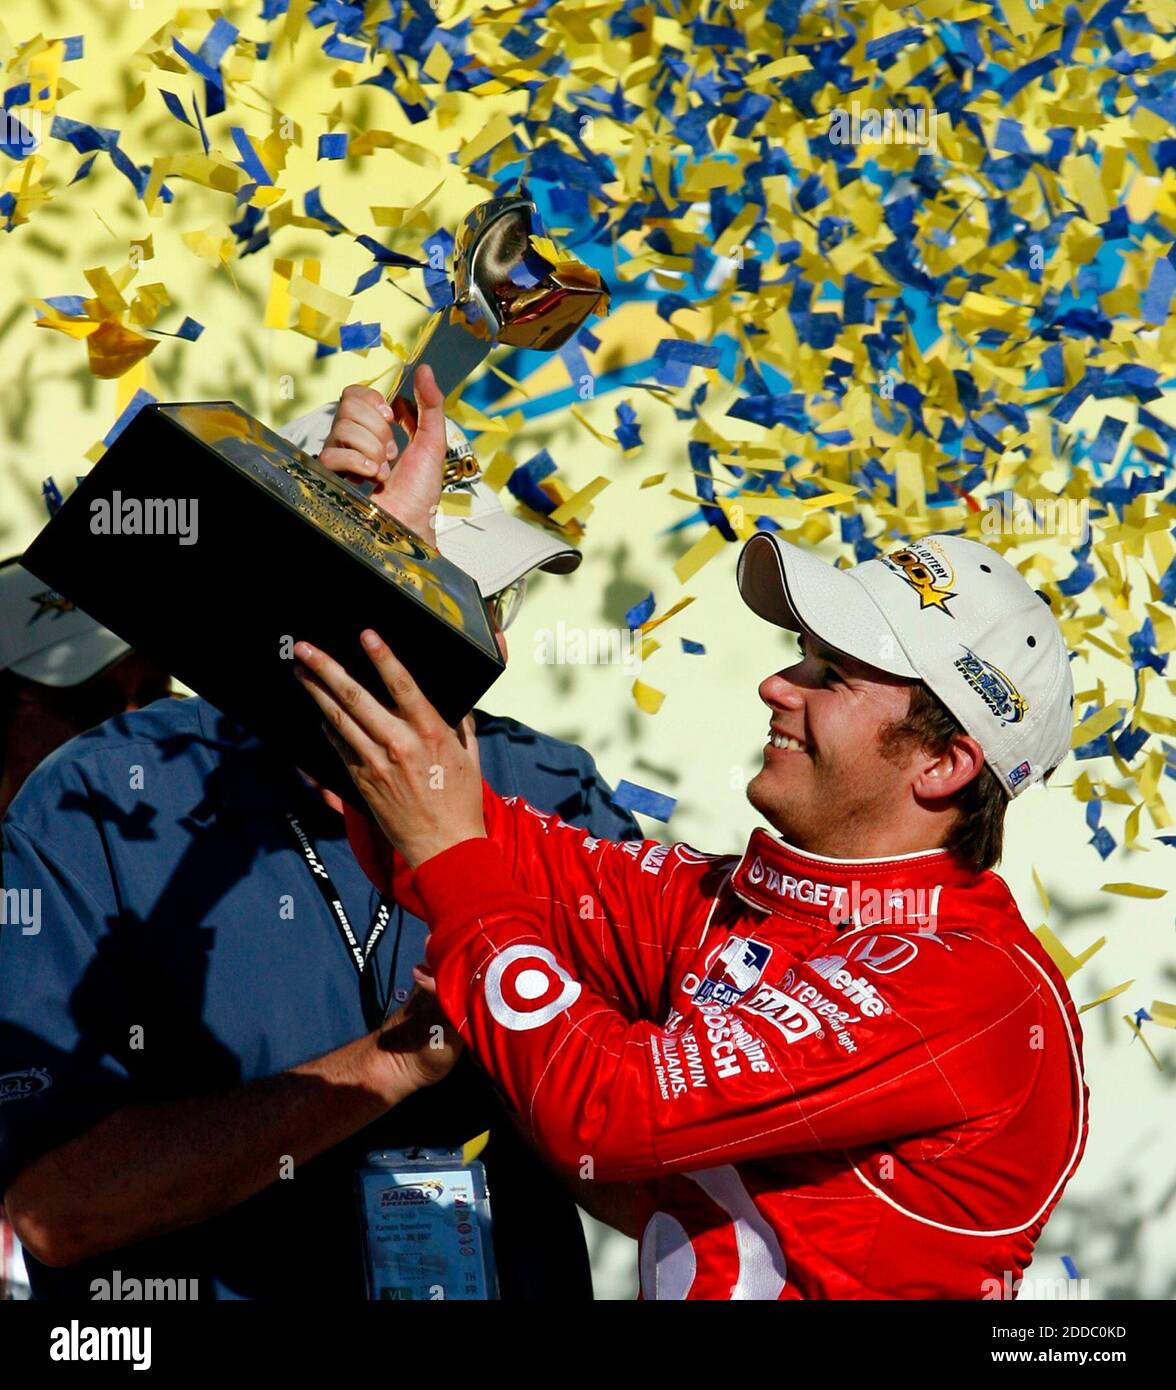 NO FILM, NO VIDEO, NO TV, NO DOCUMENTARY - Dan Wheldon took home the winner's trophy in the Kansas Lottery 300 at Kansas Speedway in Kansas City, MO, USA on April 29, 2007. Photo by Rich Sugg/Kansas City Star/MCT/ABACAPRESS.COM Stock Photo